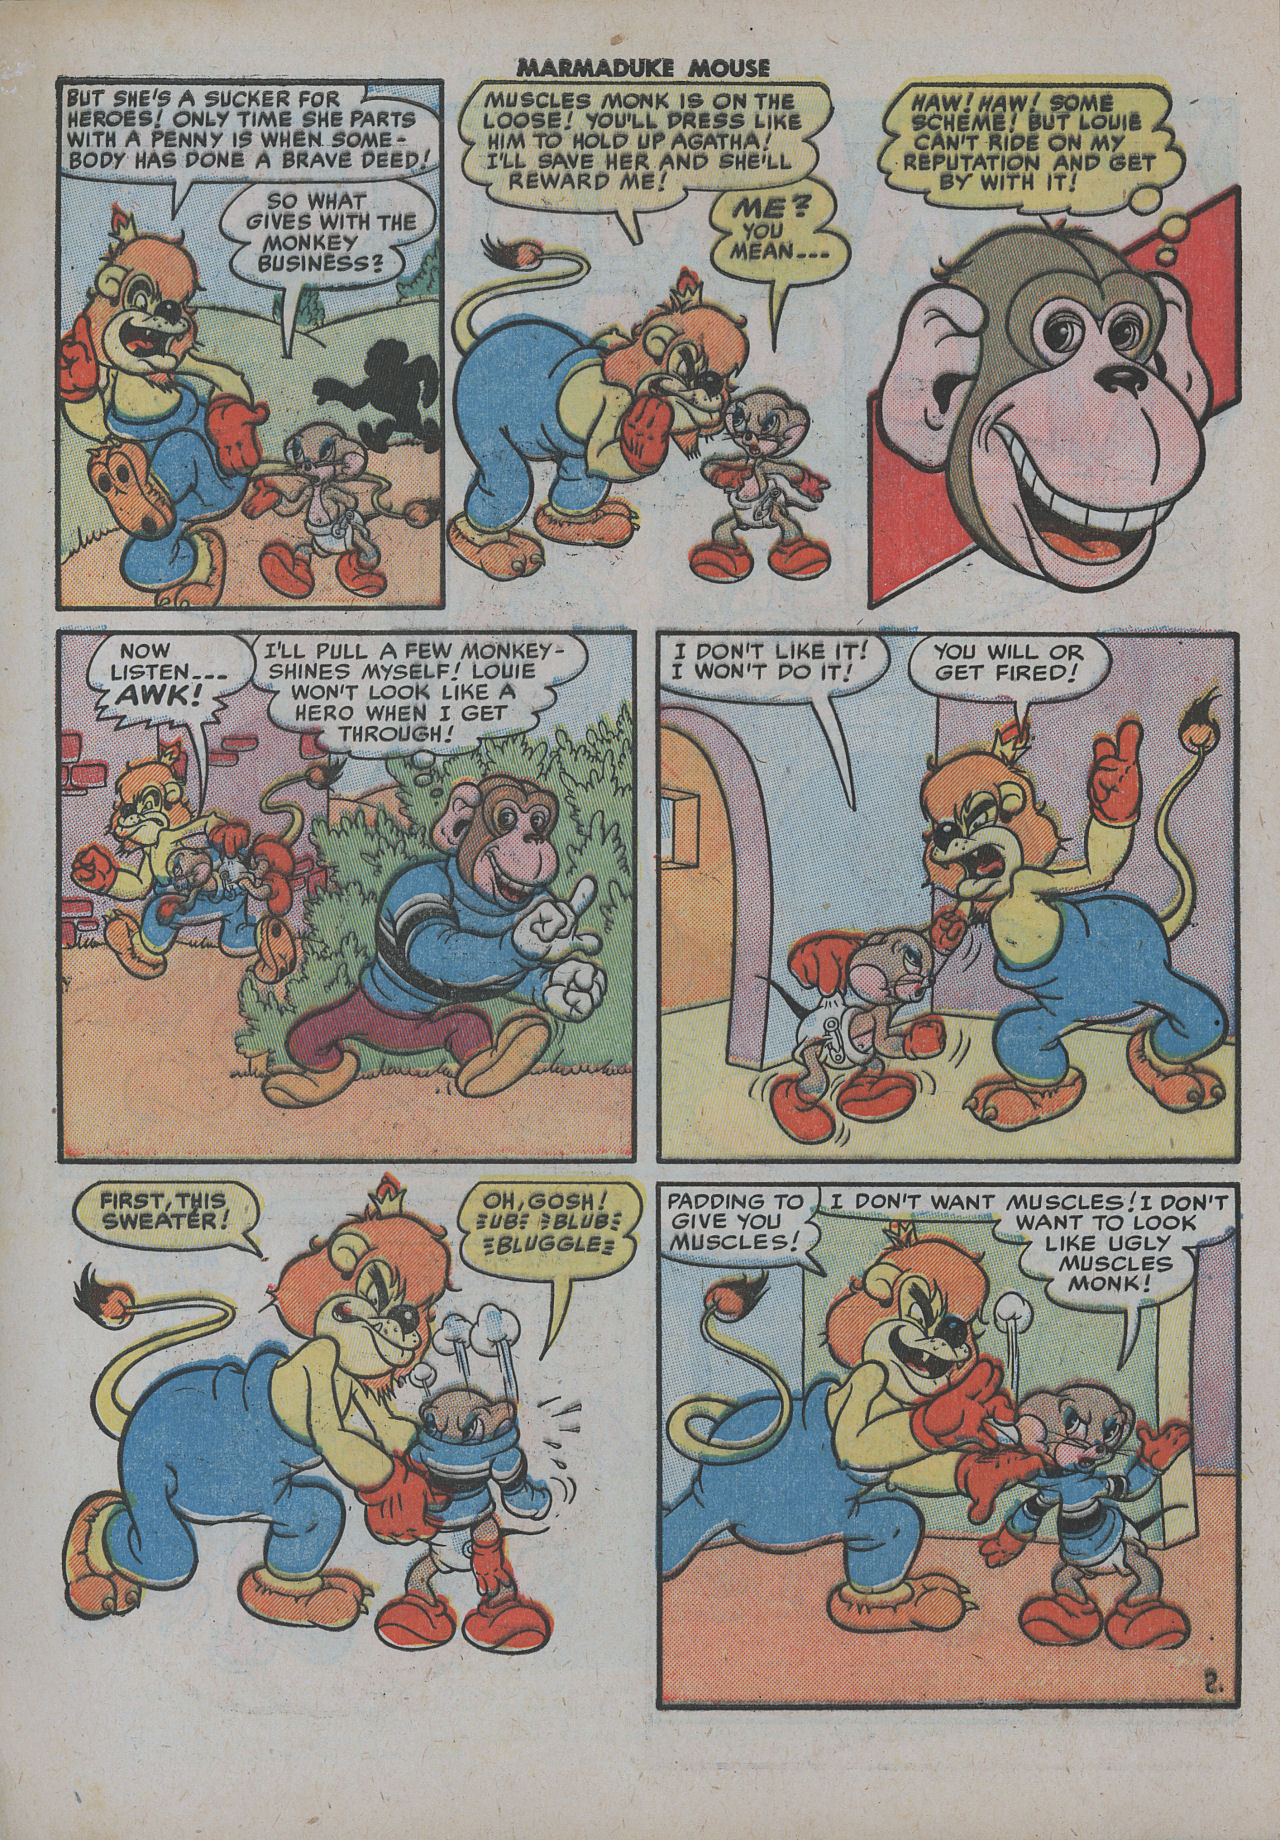 Read online Marmaduke Mouse comic -  Issue #24 - 4